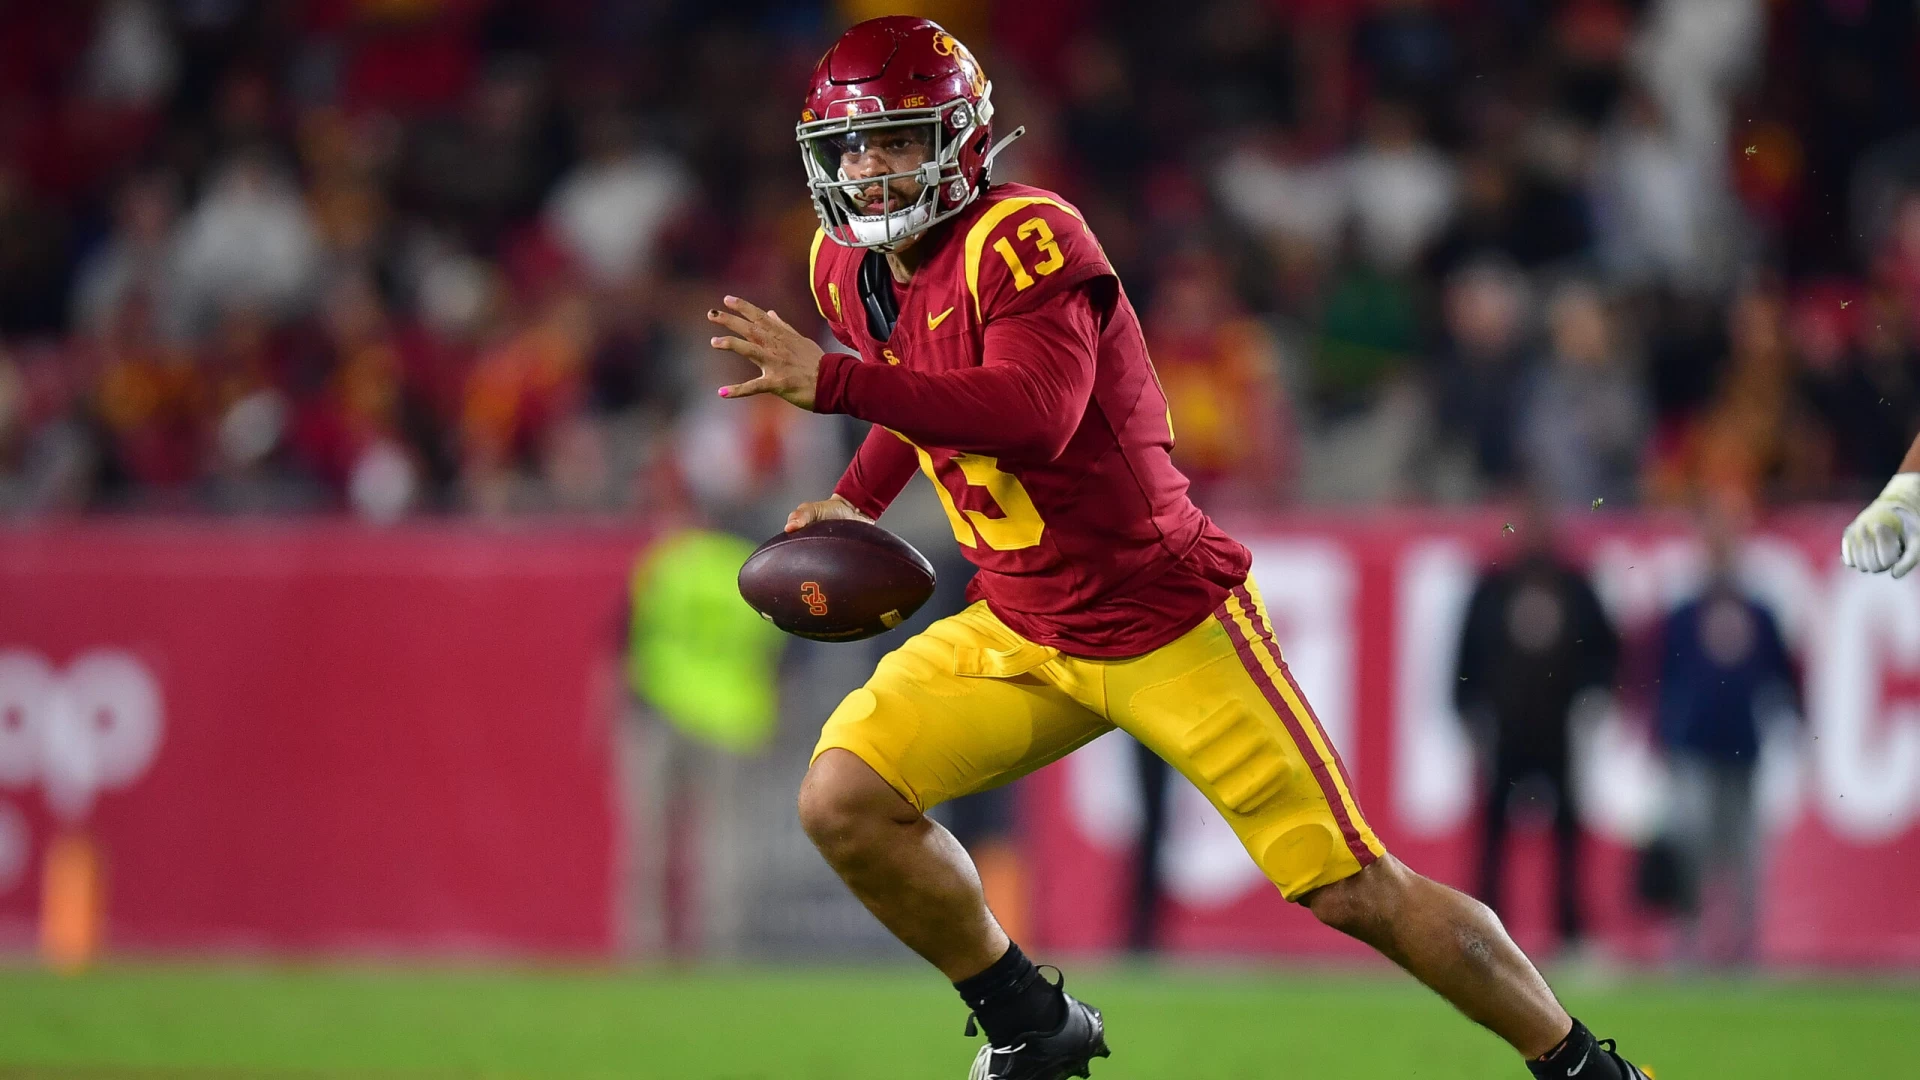 Will Caleb Williams Shine Fresh Doubts About USC Star as NFL Draft Looms--